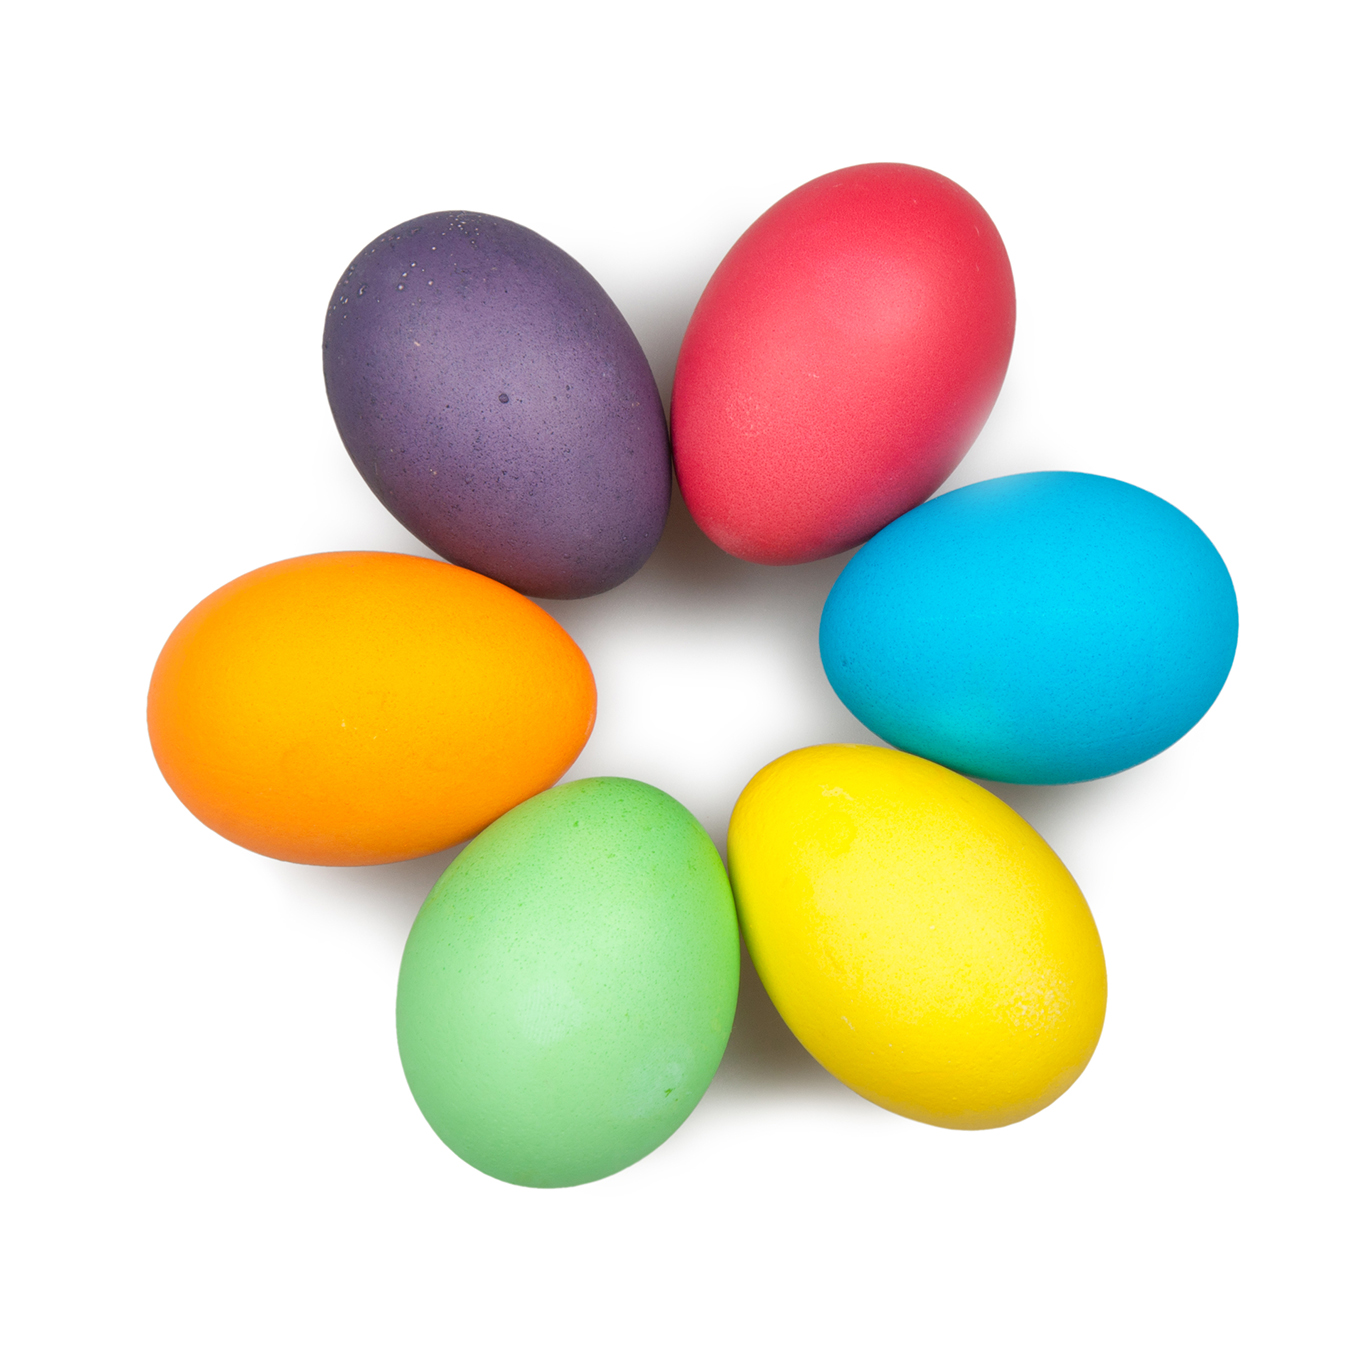 Easter eggs are boiled in assortment